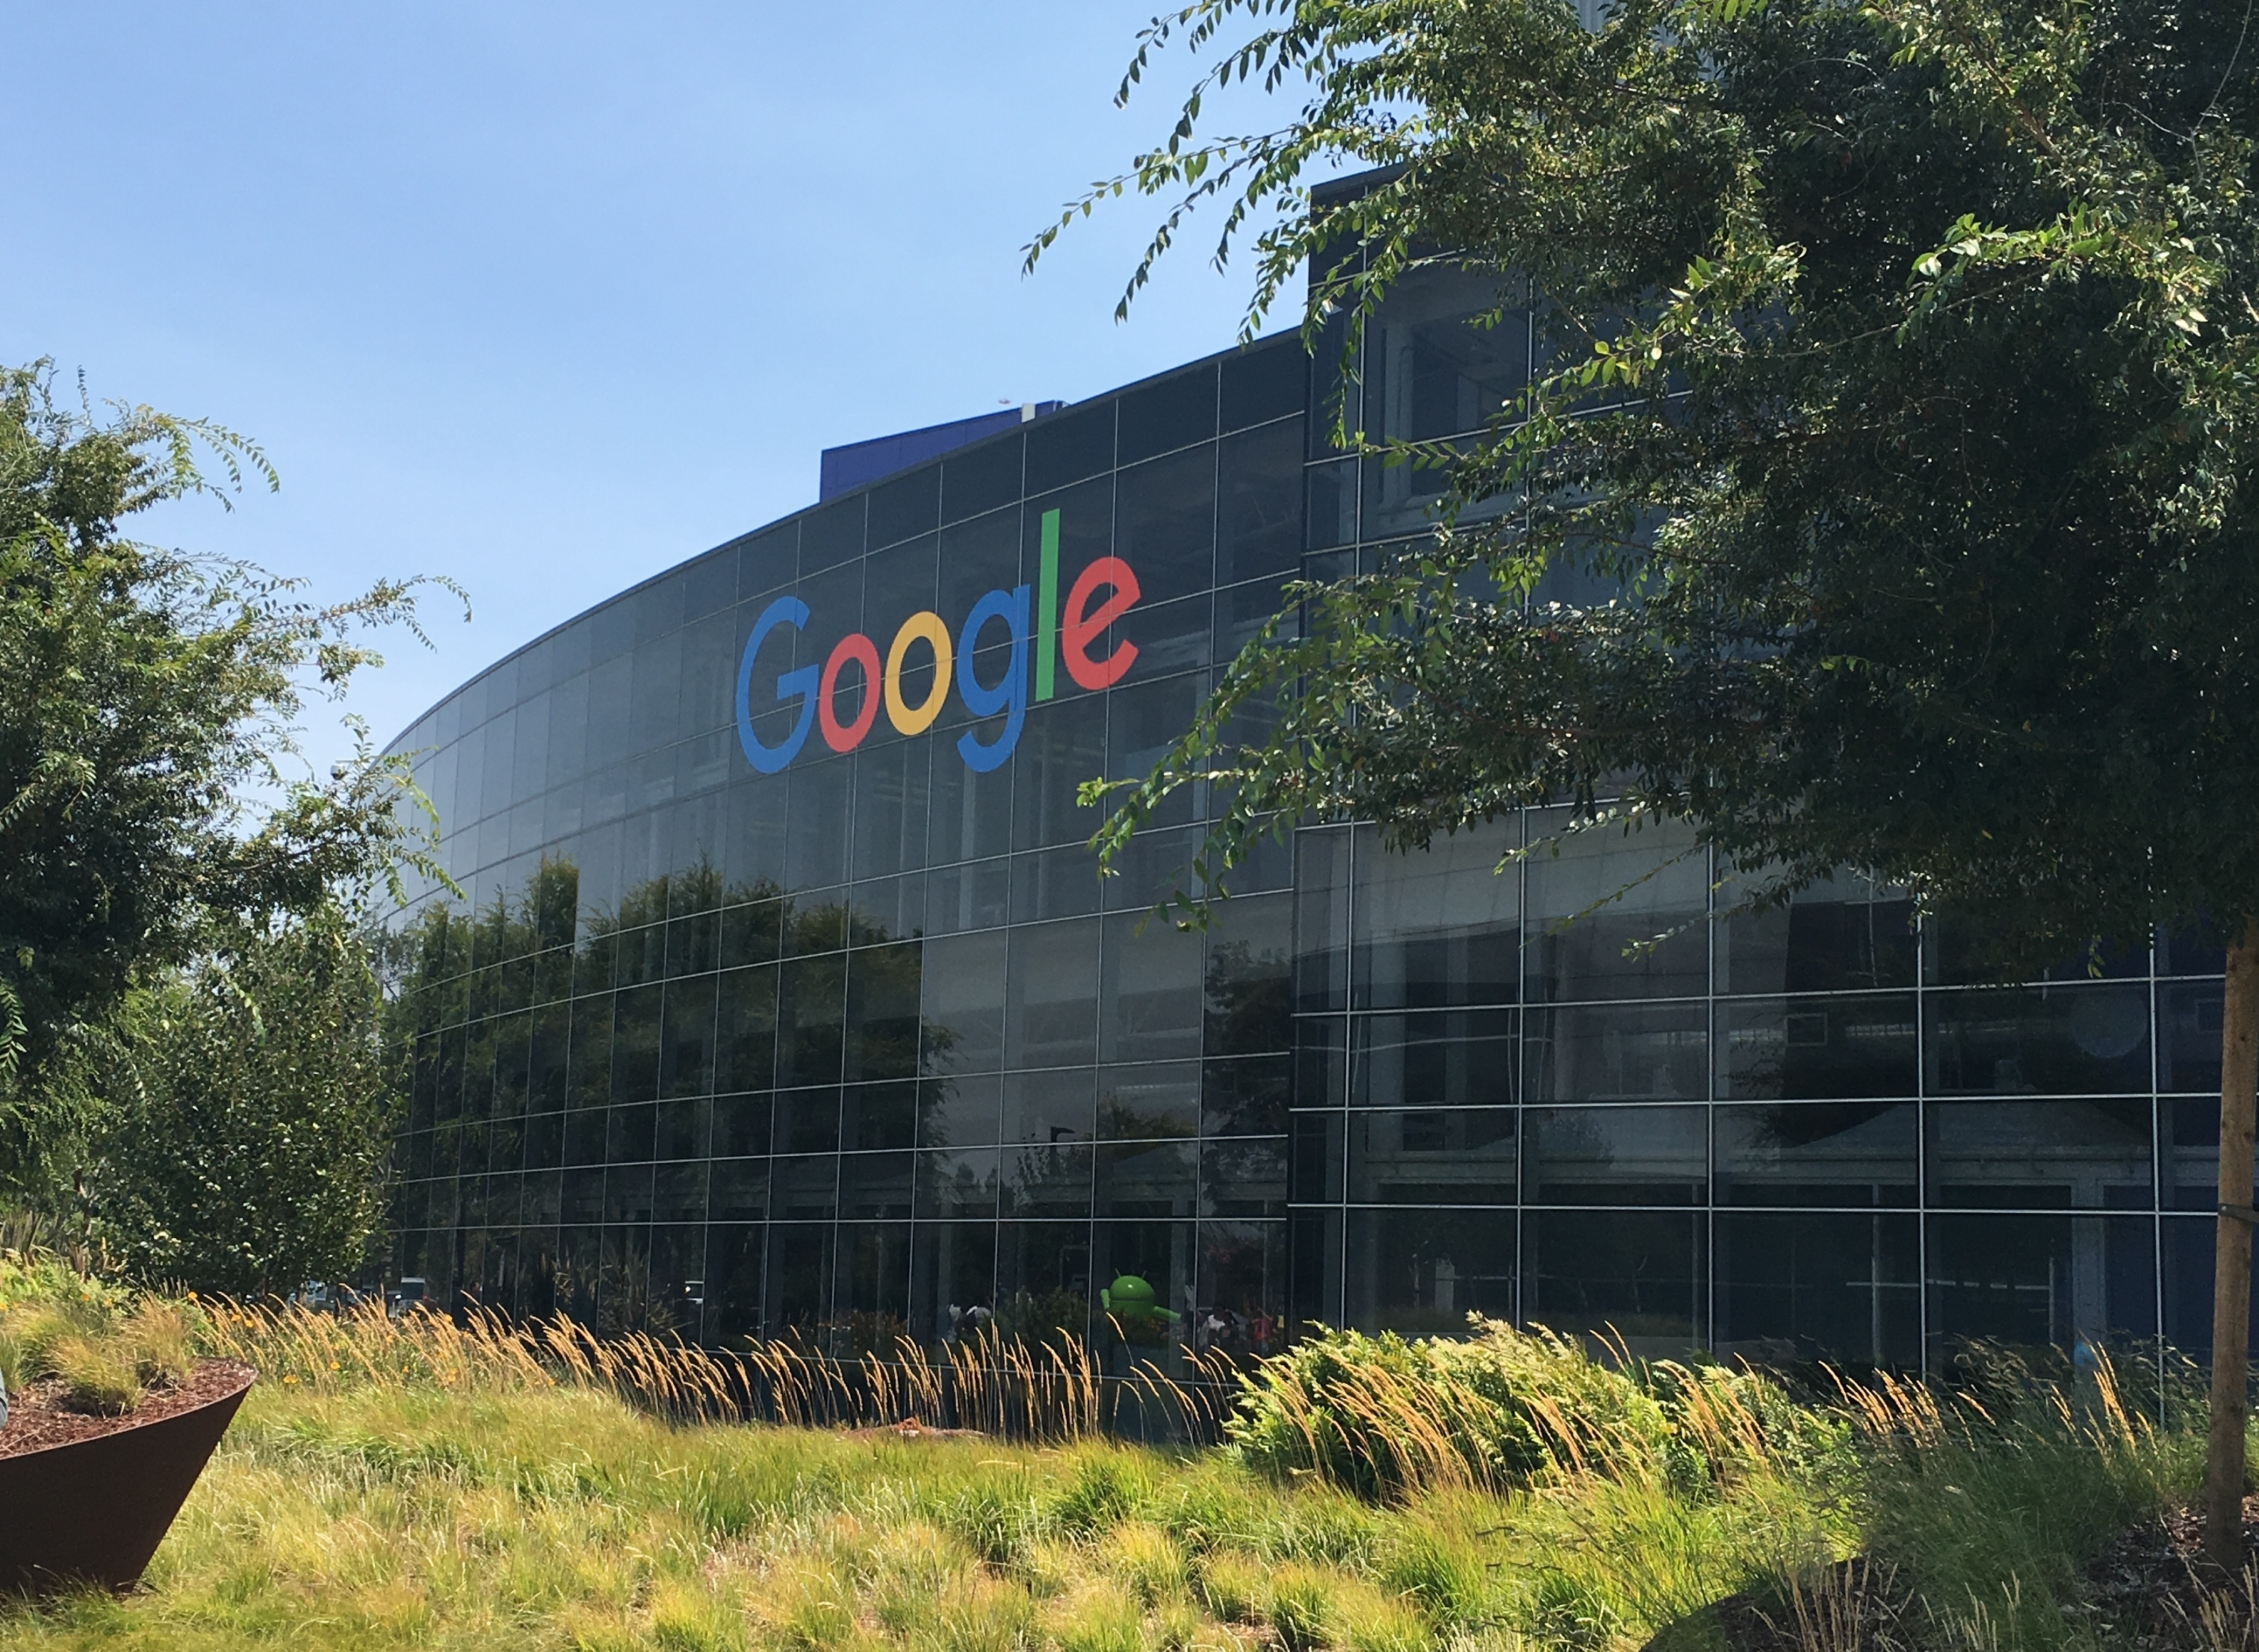 Google Layoff: After Twitter and Meta, Google is also preparing for layoffs